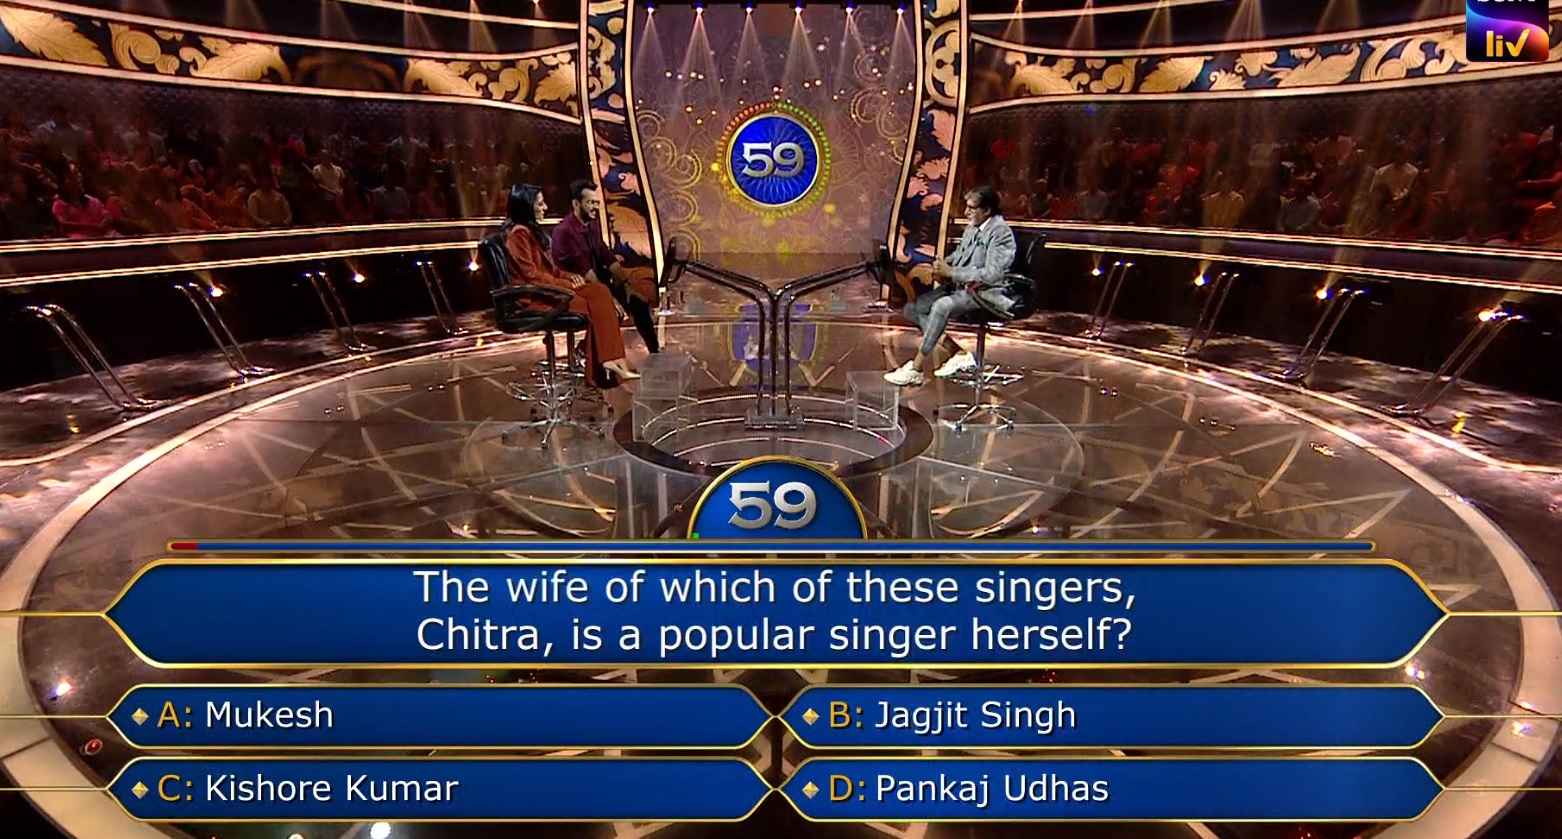 Ques : The wife of which of these singers Chitra, is a popular singer herself?